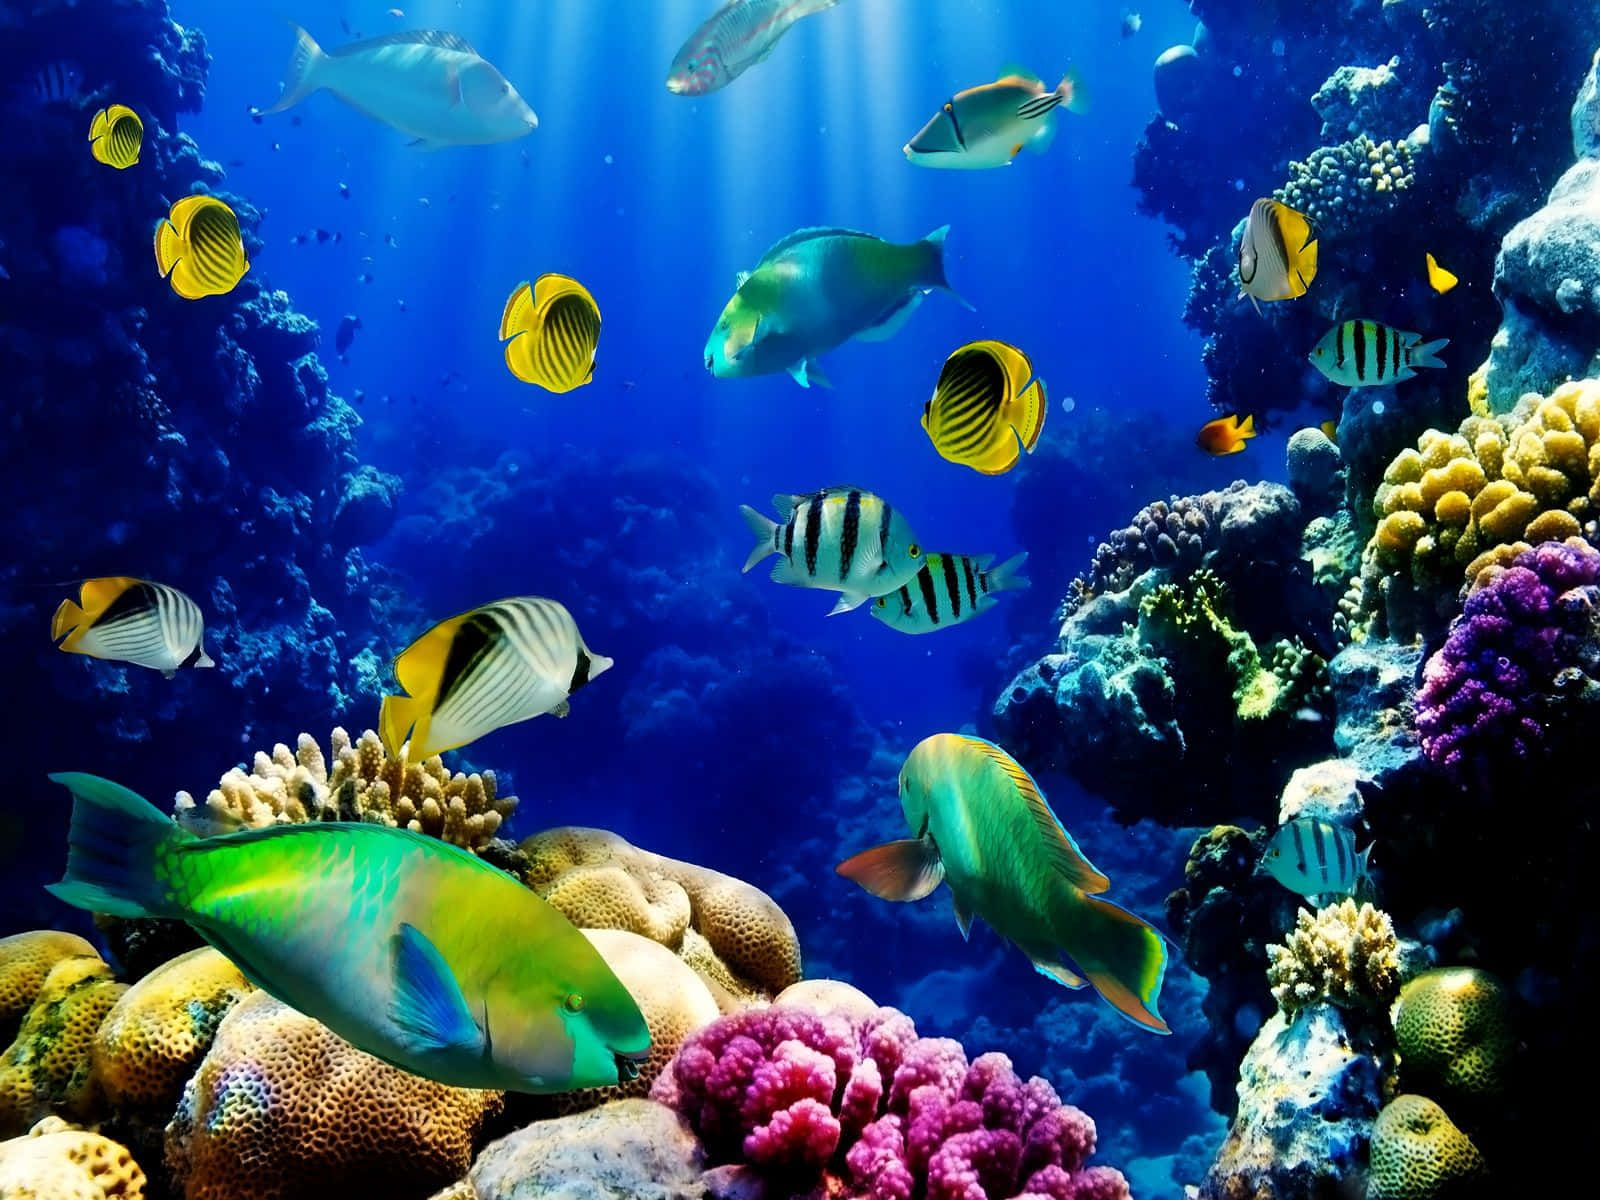 A Colorful Underwater Scene With Fish And Coral Wallpaper